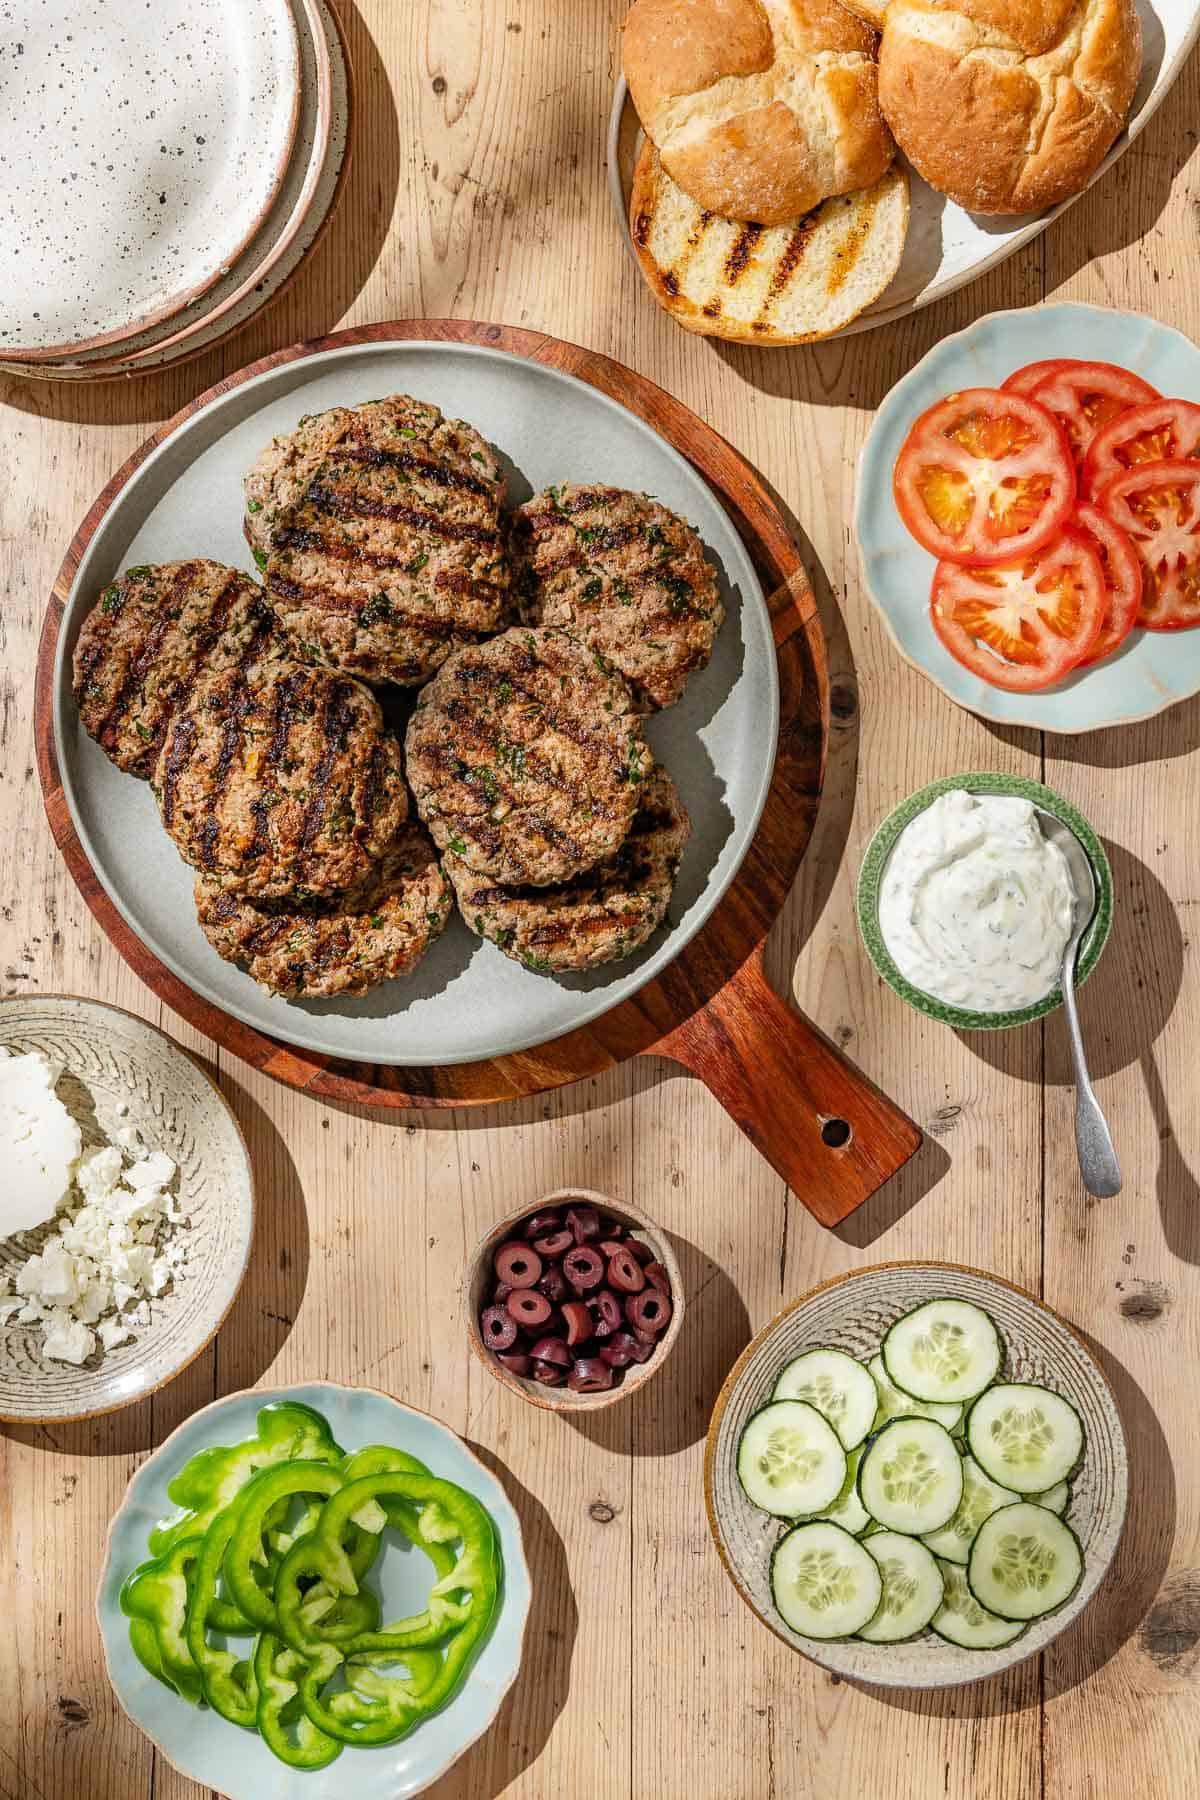 An overhead photo of grilled greek style lamb burger patties on a serving platter on a wooden try. Surrounding this is a stack of plates, plates of feta cheese, sliced cucumbers, sliced tomatoes, sliced green peppers and grilled buns as well as bowls of kalamata olives and tzatziki sauce.